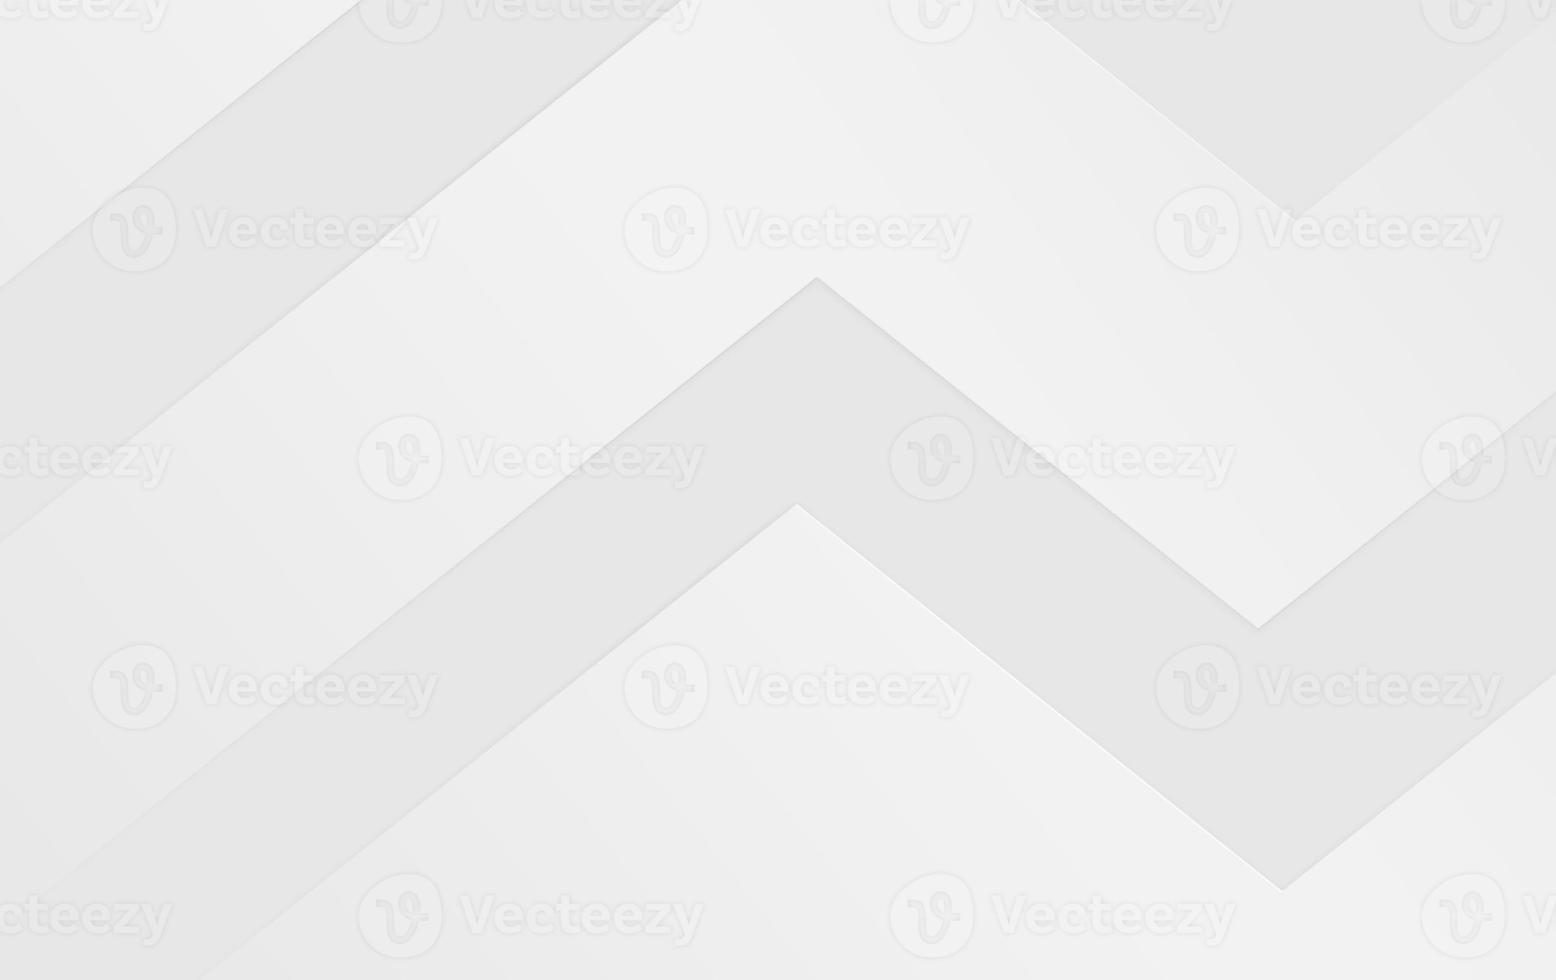 white background and gray abstract texture with diagonal lines It can be used in cover designs, book designs, posters, CD covers, flyers, website backgrounds or advertisements. 3d render photo